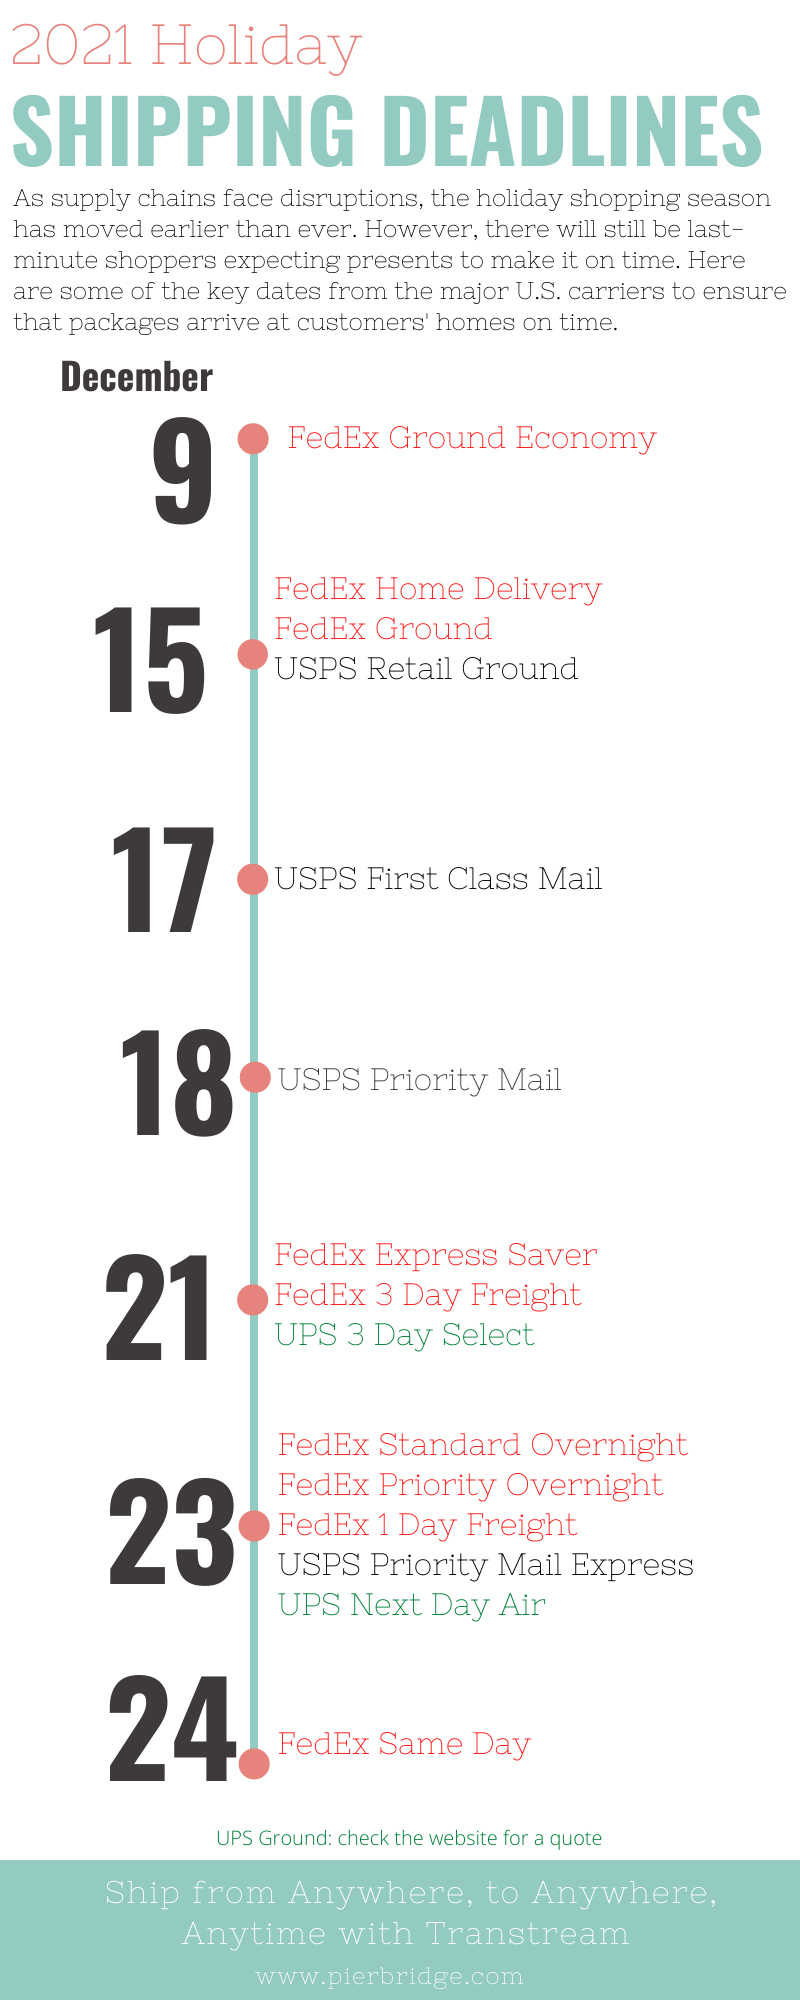 Holiday Shipping Deadlines 2021